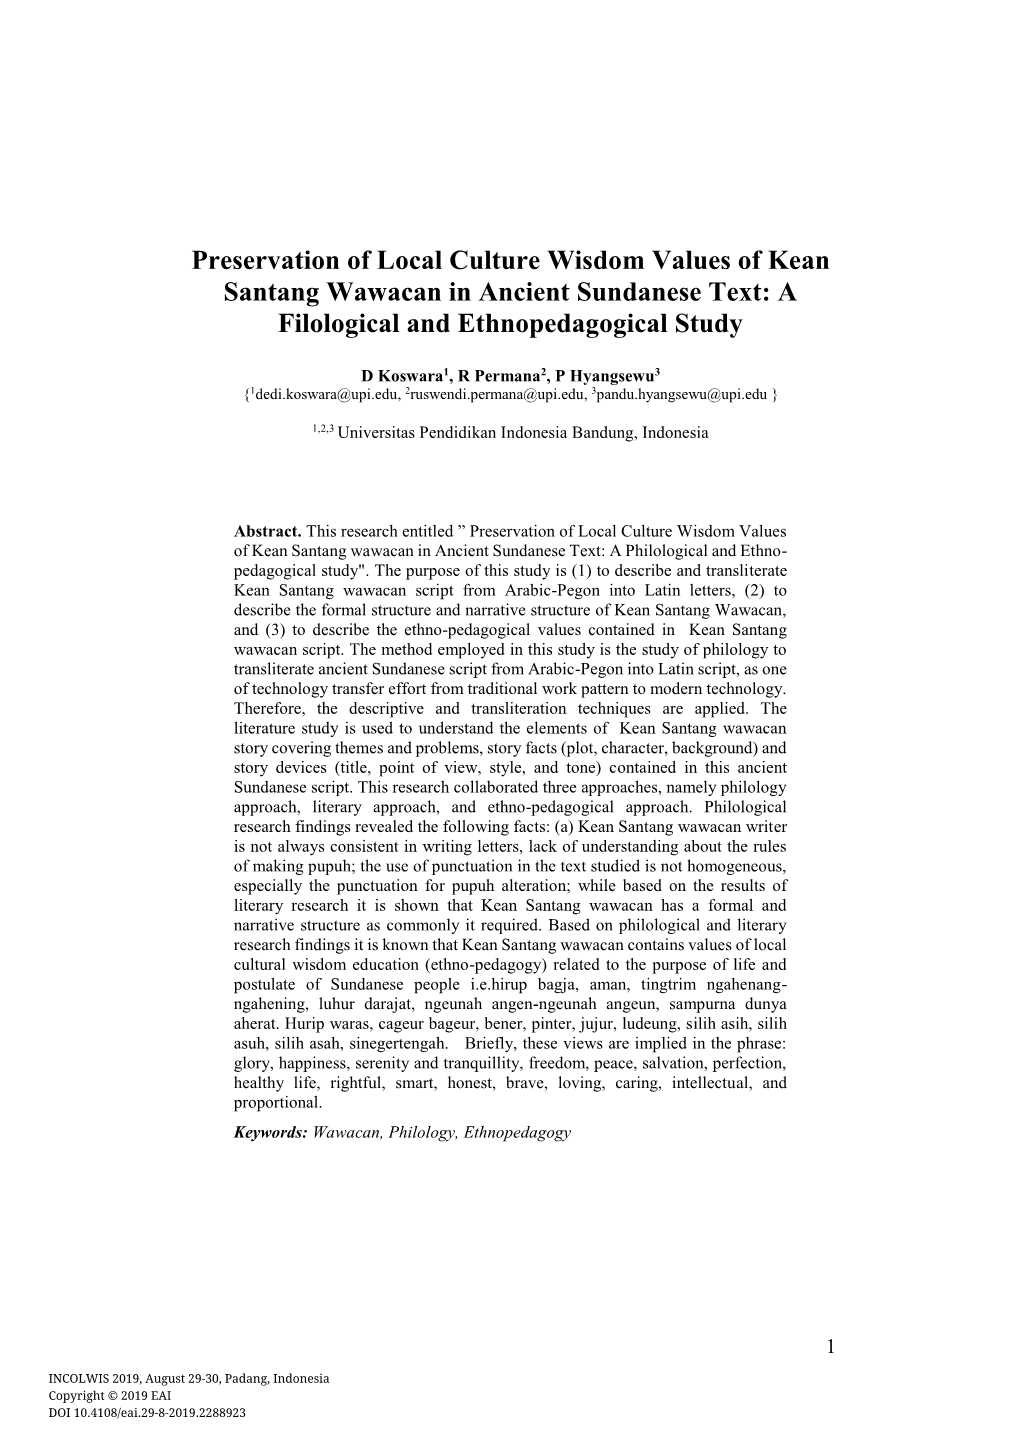 Preservation of Local Culture Wisdom Values of Kean Santang Wawacan in Ancient Sundanese Text: a Filological and Ethnopedagogical Study